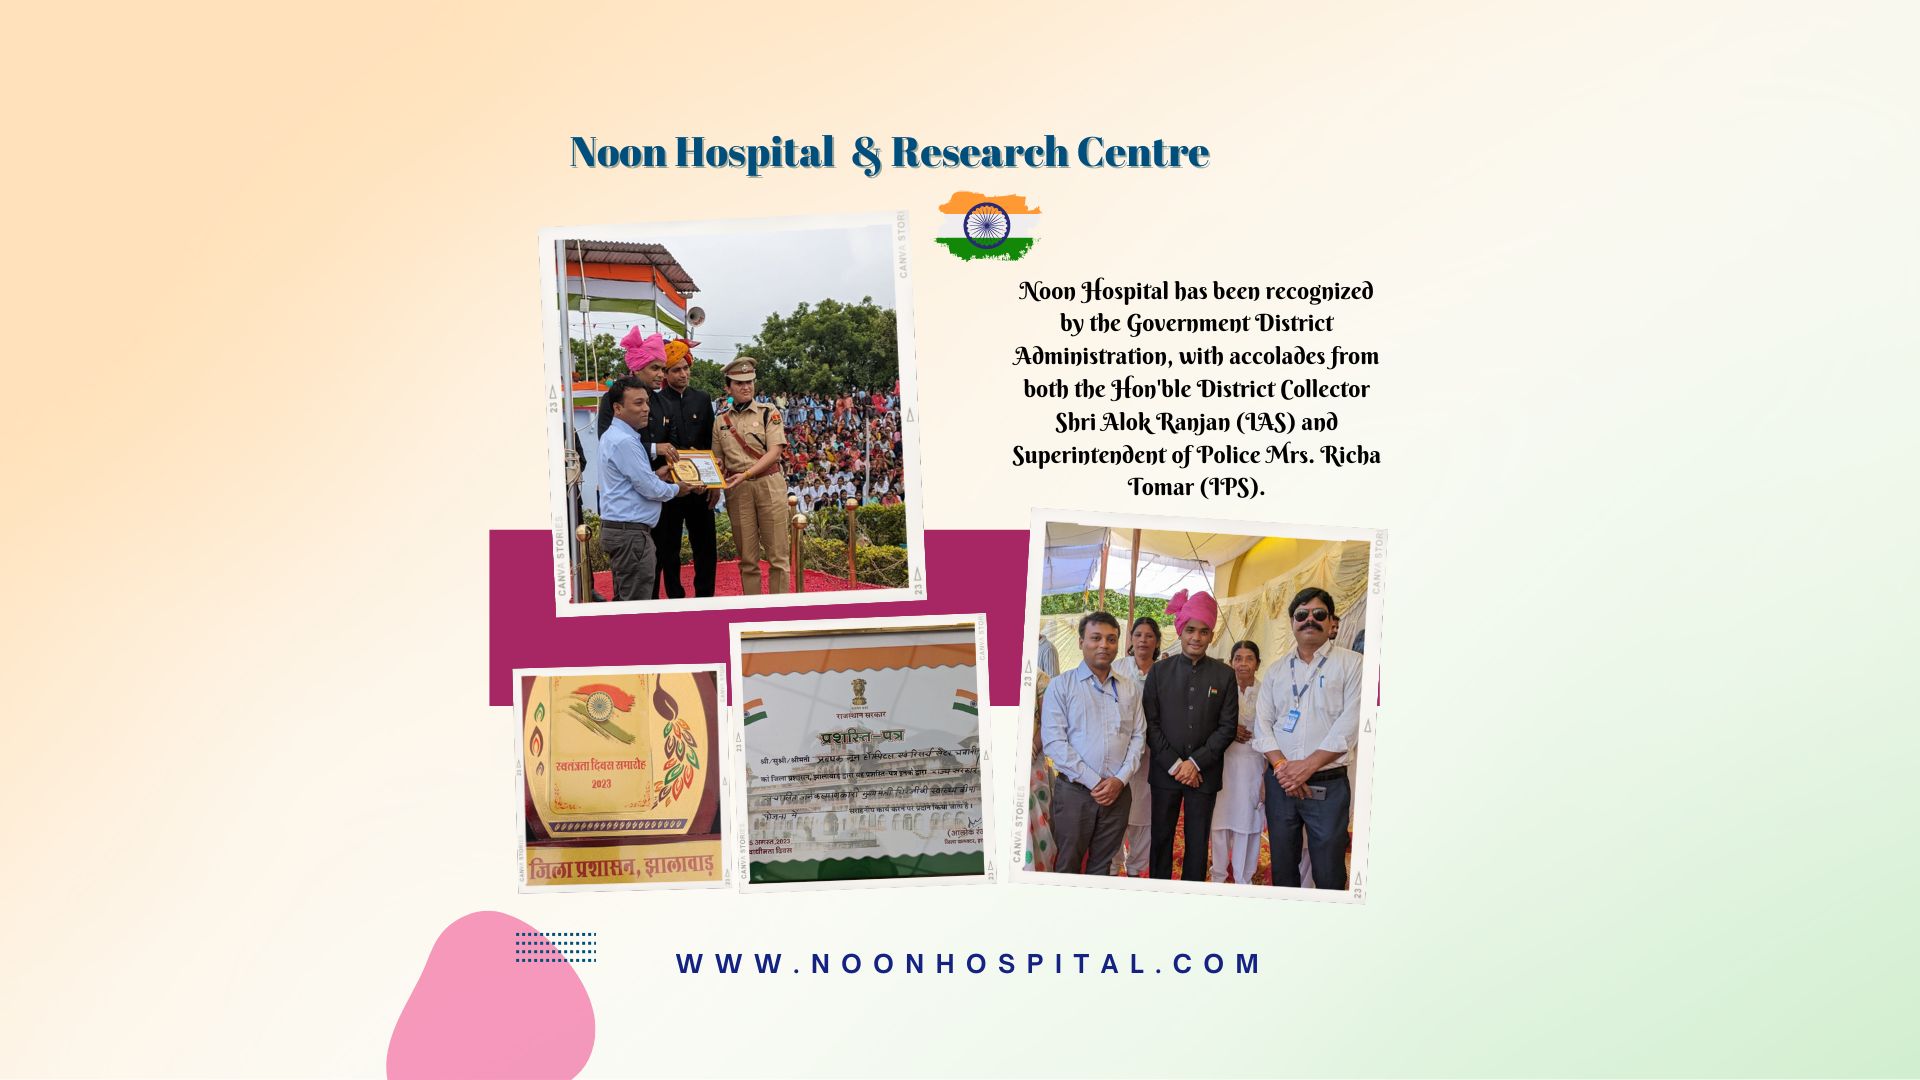 Noon Hospital has been Recognized by the Government District Administration